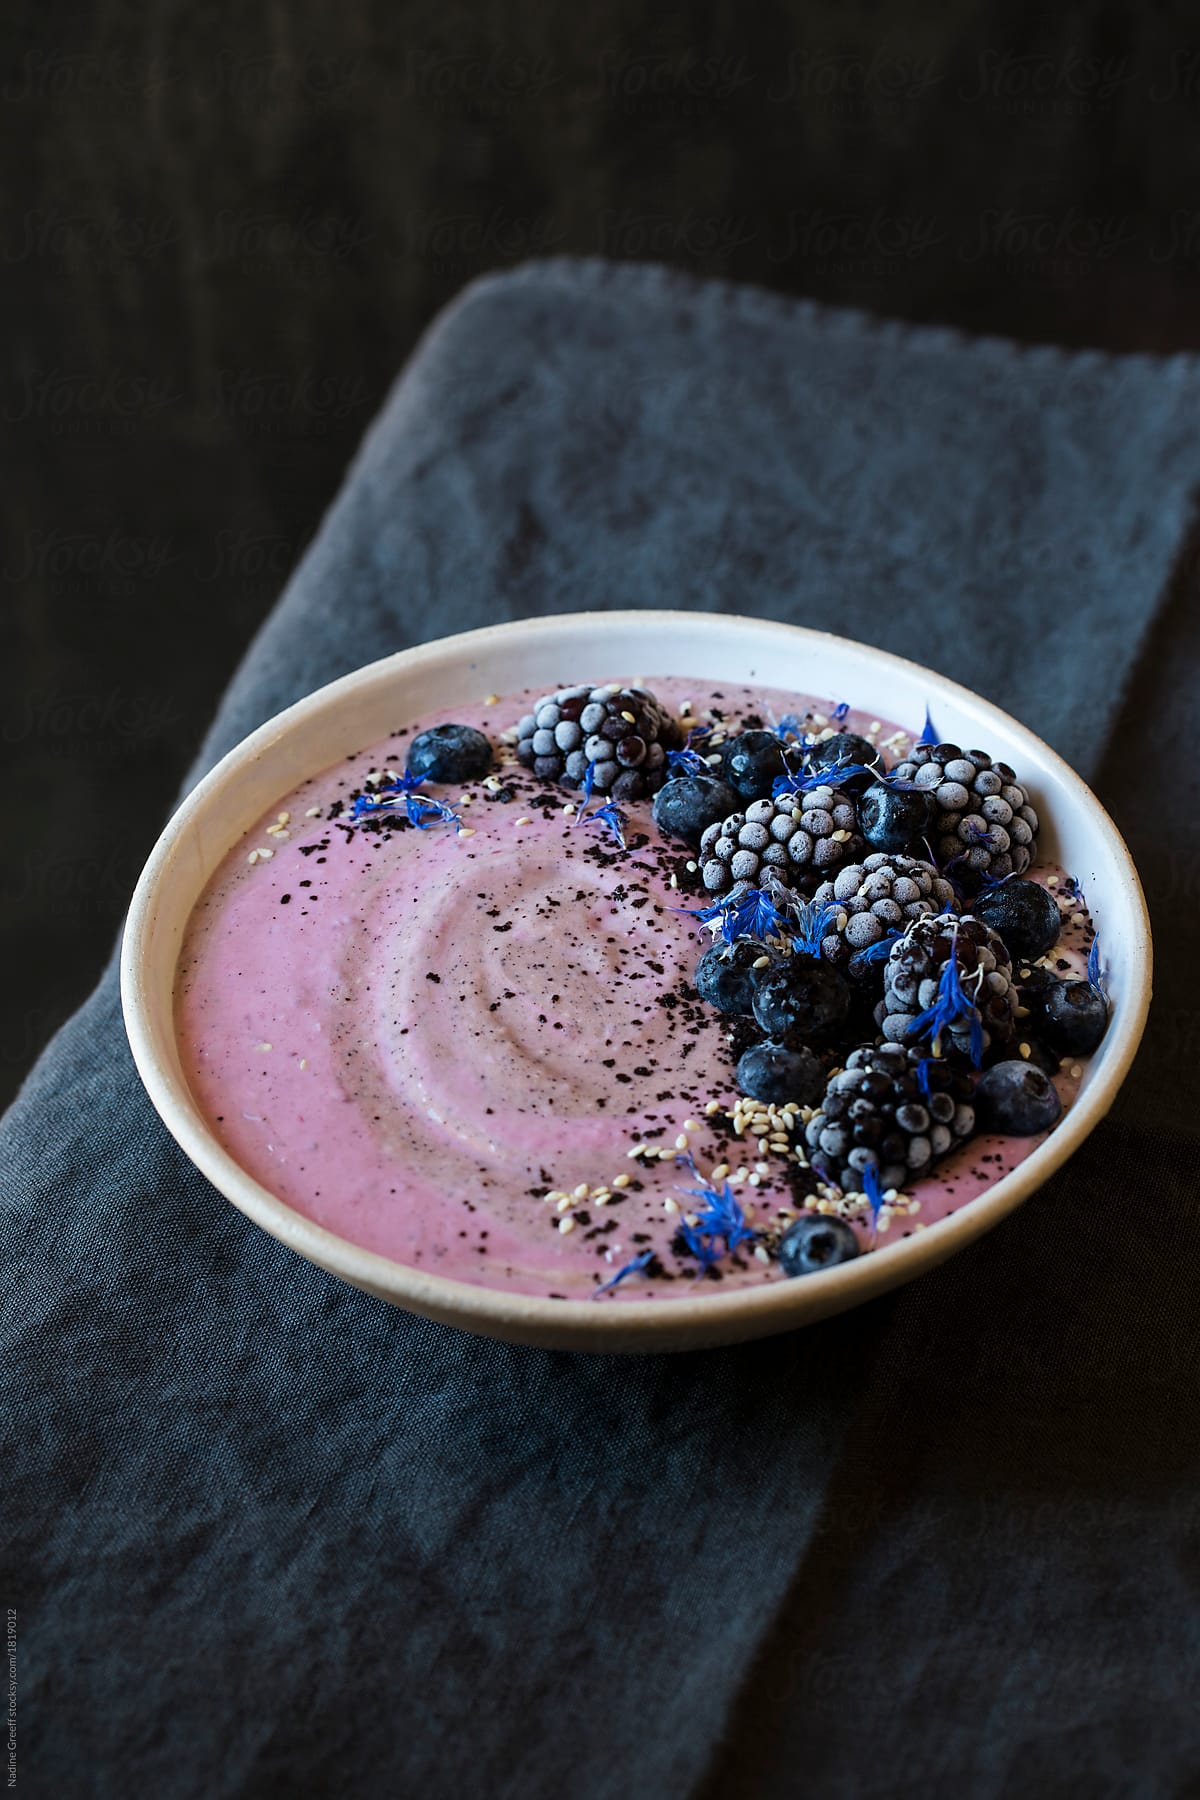 Breakfast smoothie topped with berries, acai berry powder, toasted sesame seeds